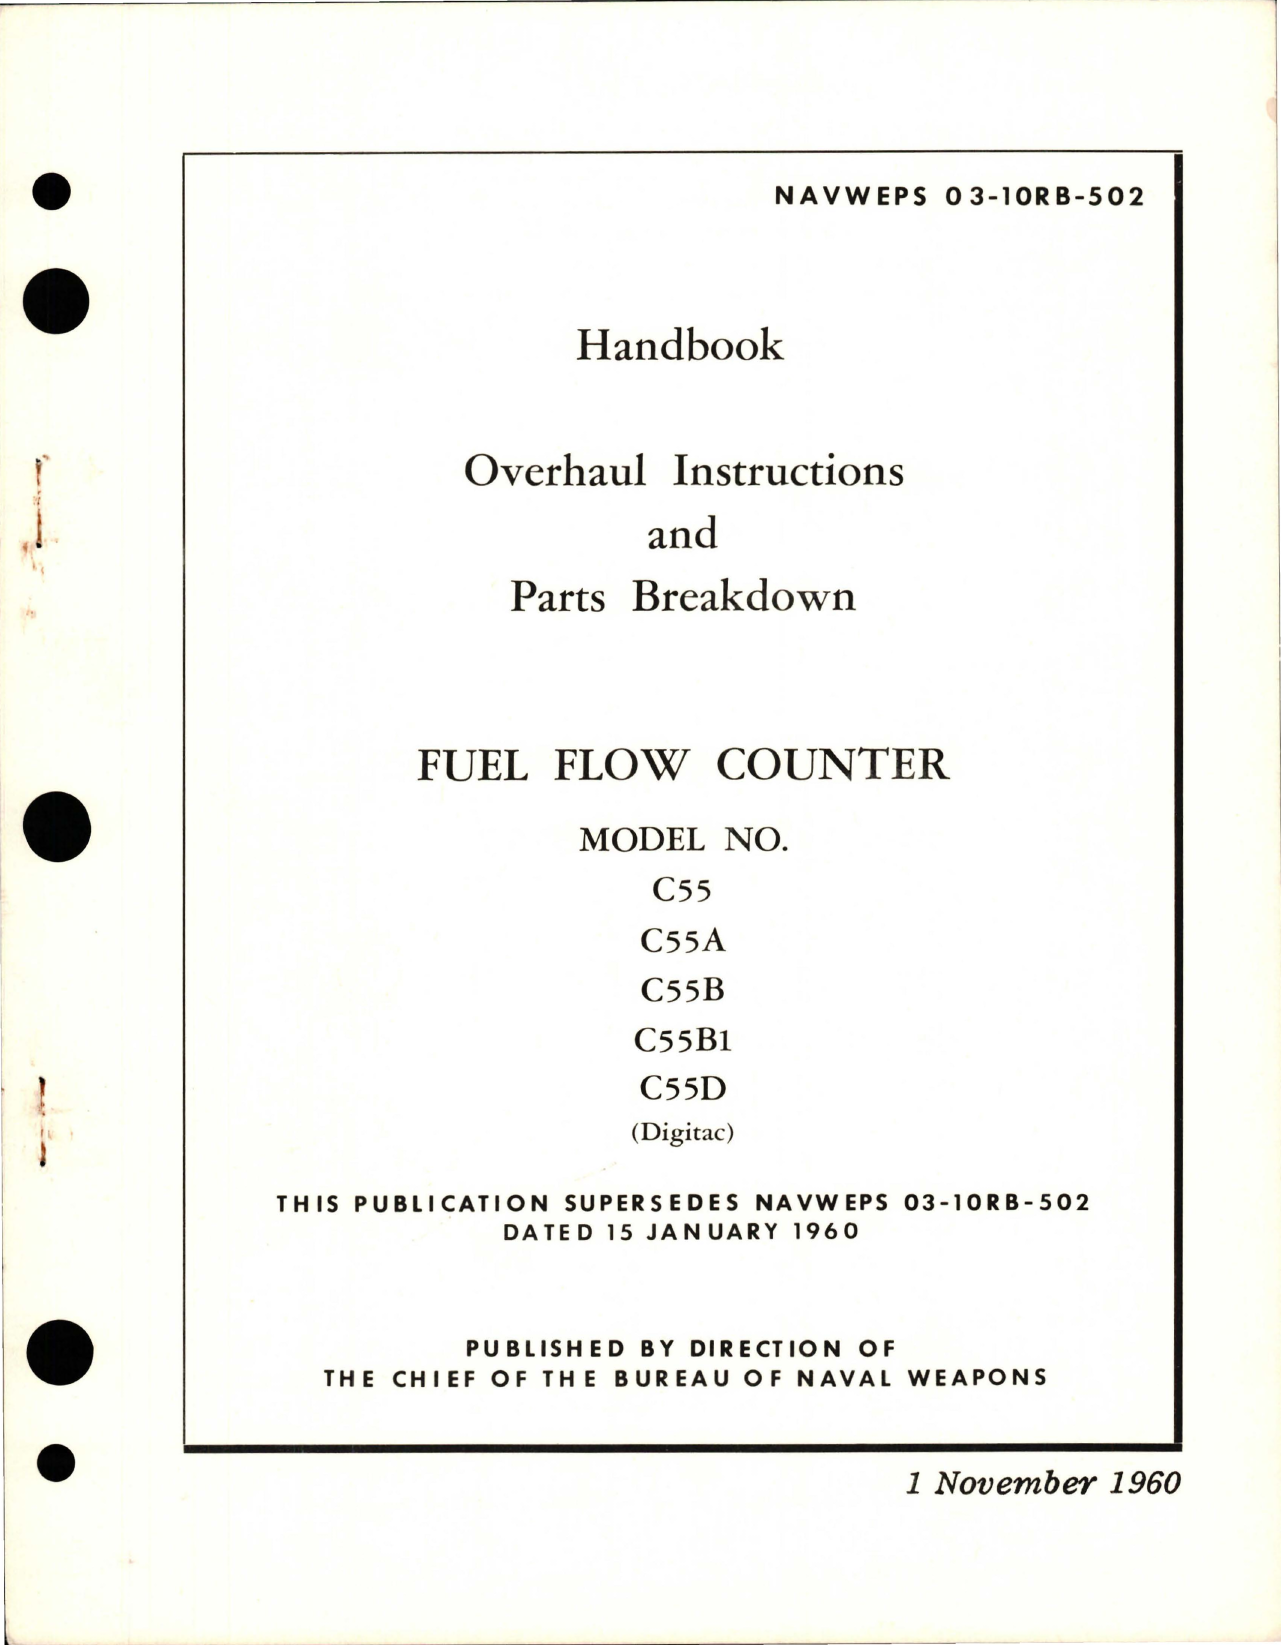 Sample page 1 from AirCorps Library document: Overhaul Instructions with Parts Breakdown for Fuel Flow Counter - Models C55, C55A, C55B, C55B1 and C55D